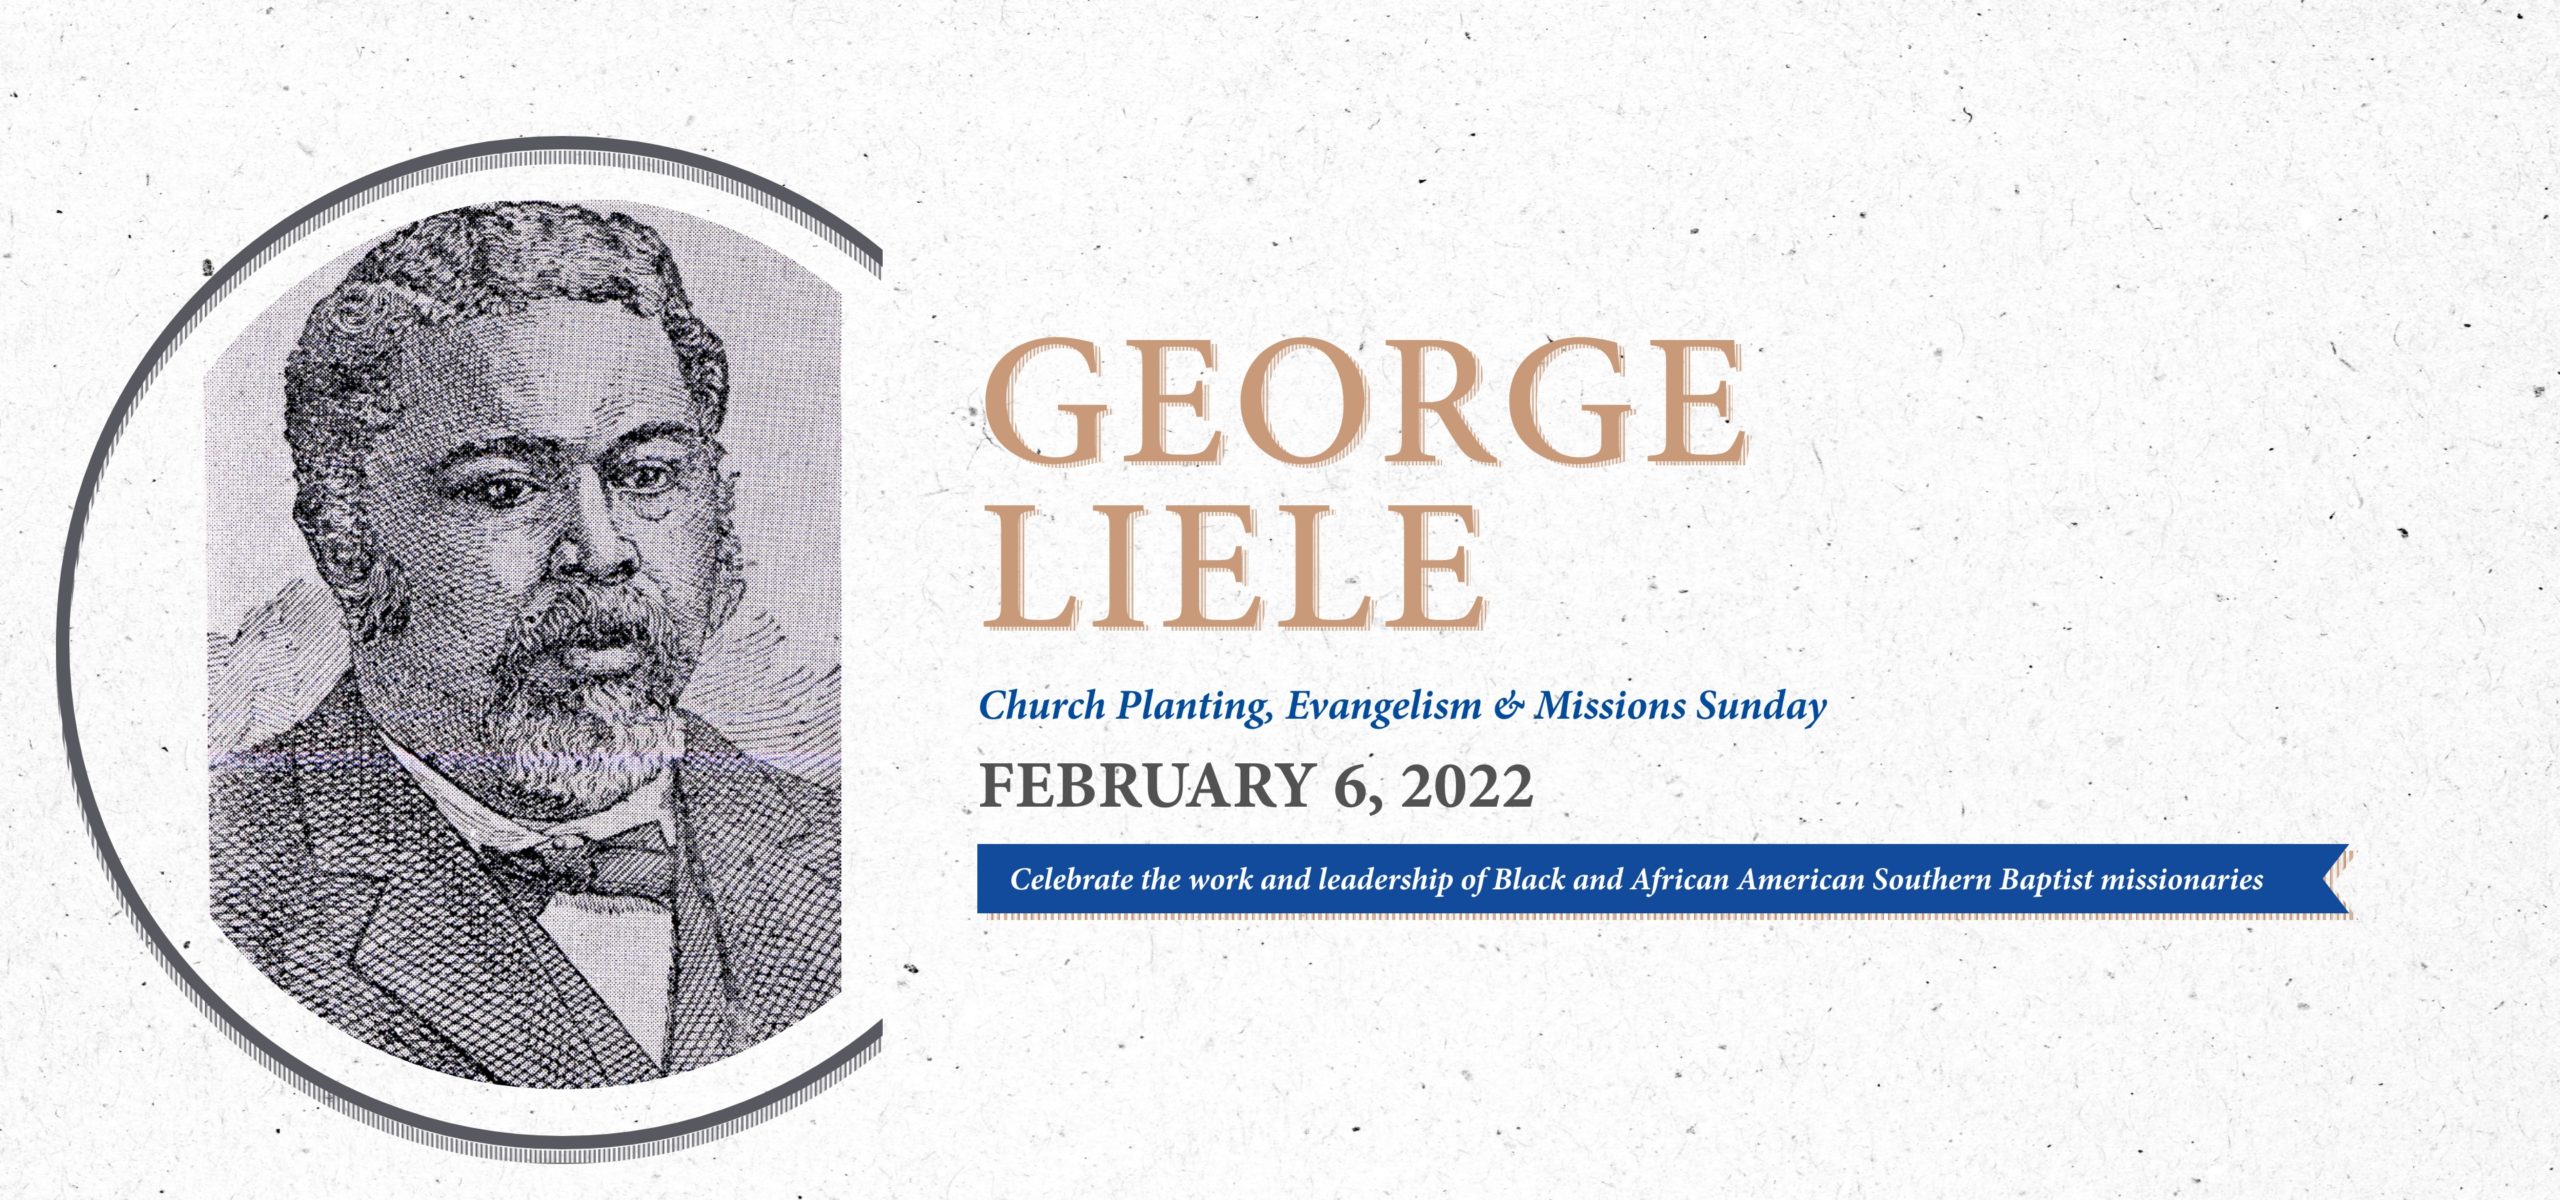 George Liele Church Planting, Evangelism and Missions Sunday, February 6, 2022